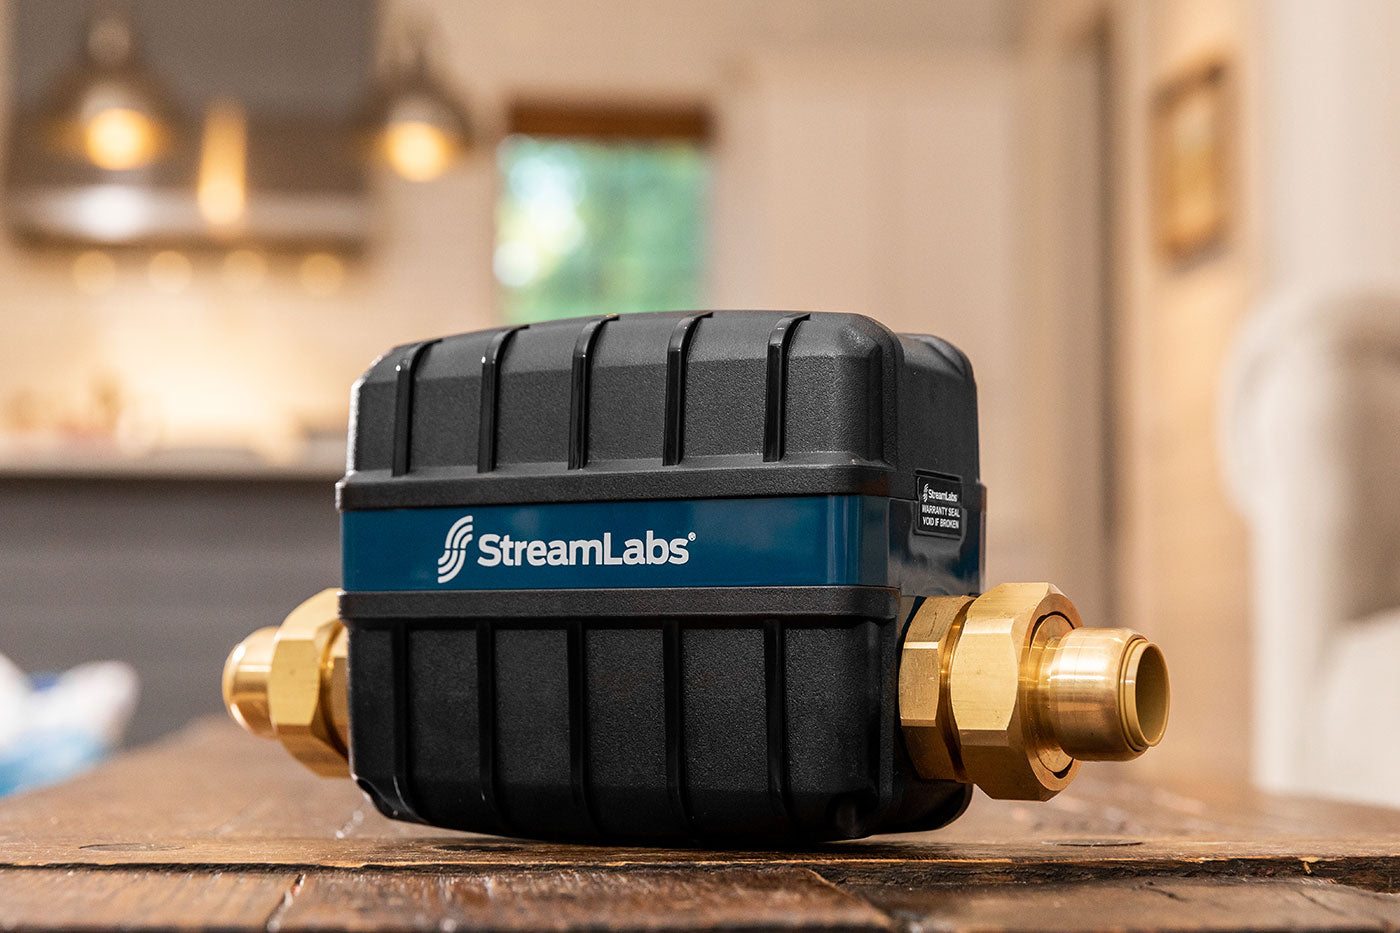 StreamLabs Water Control lifestyle product image